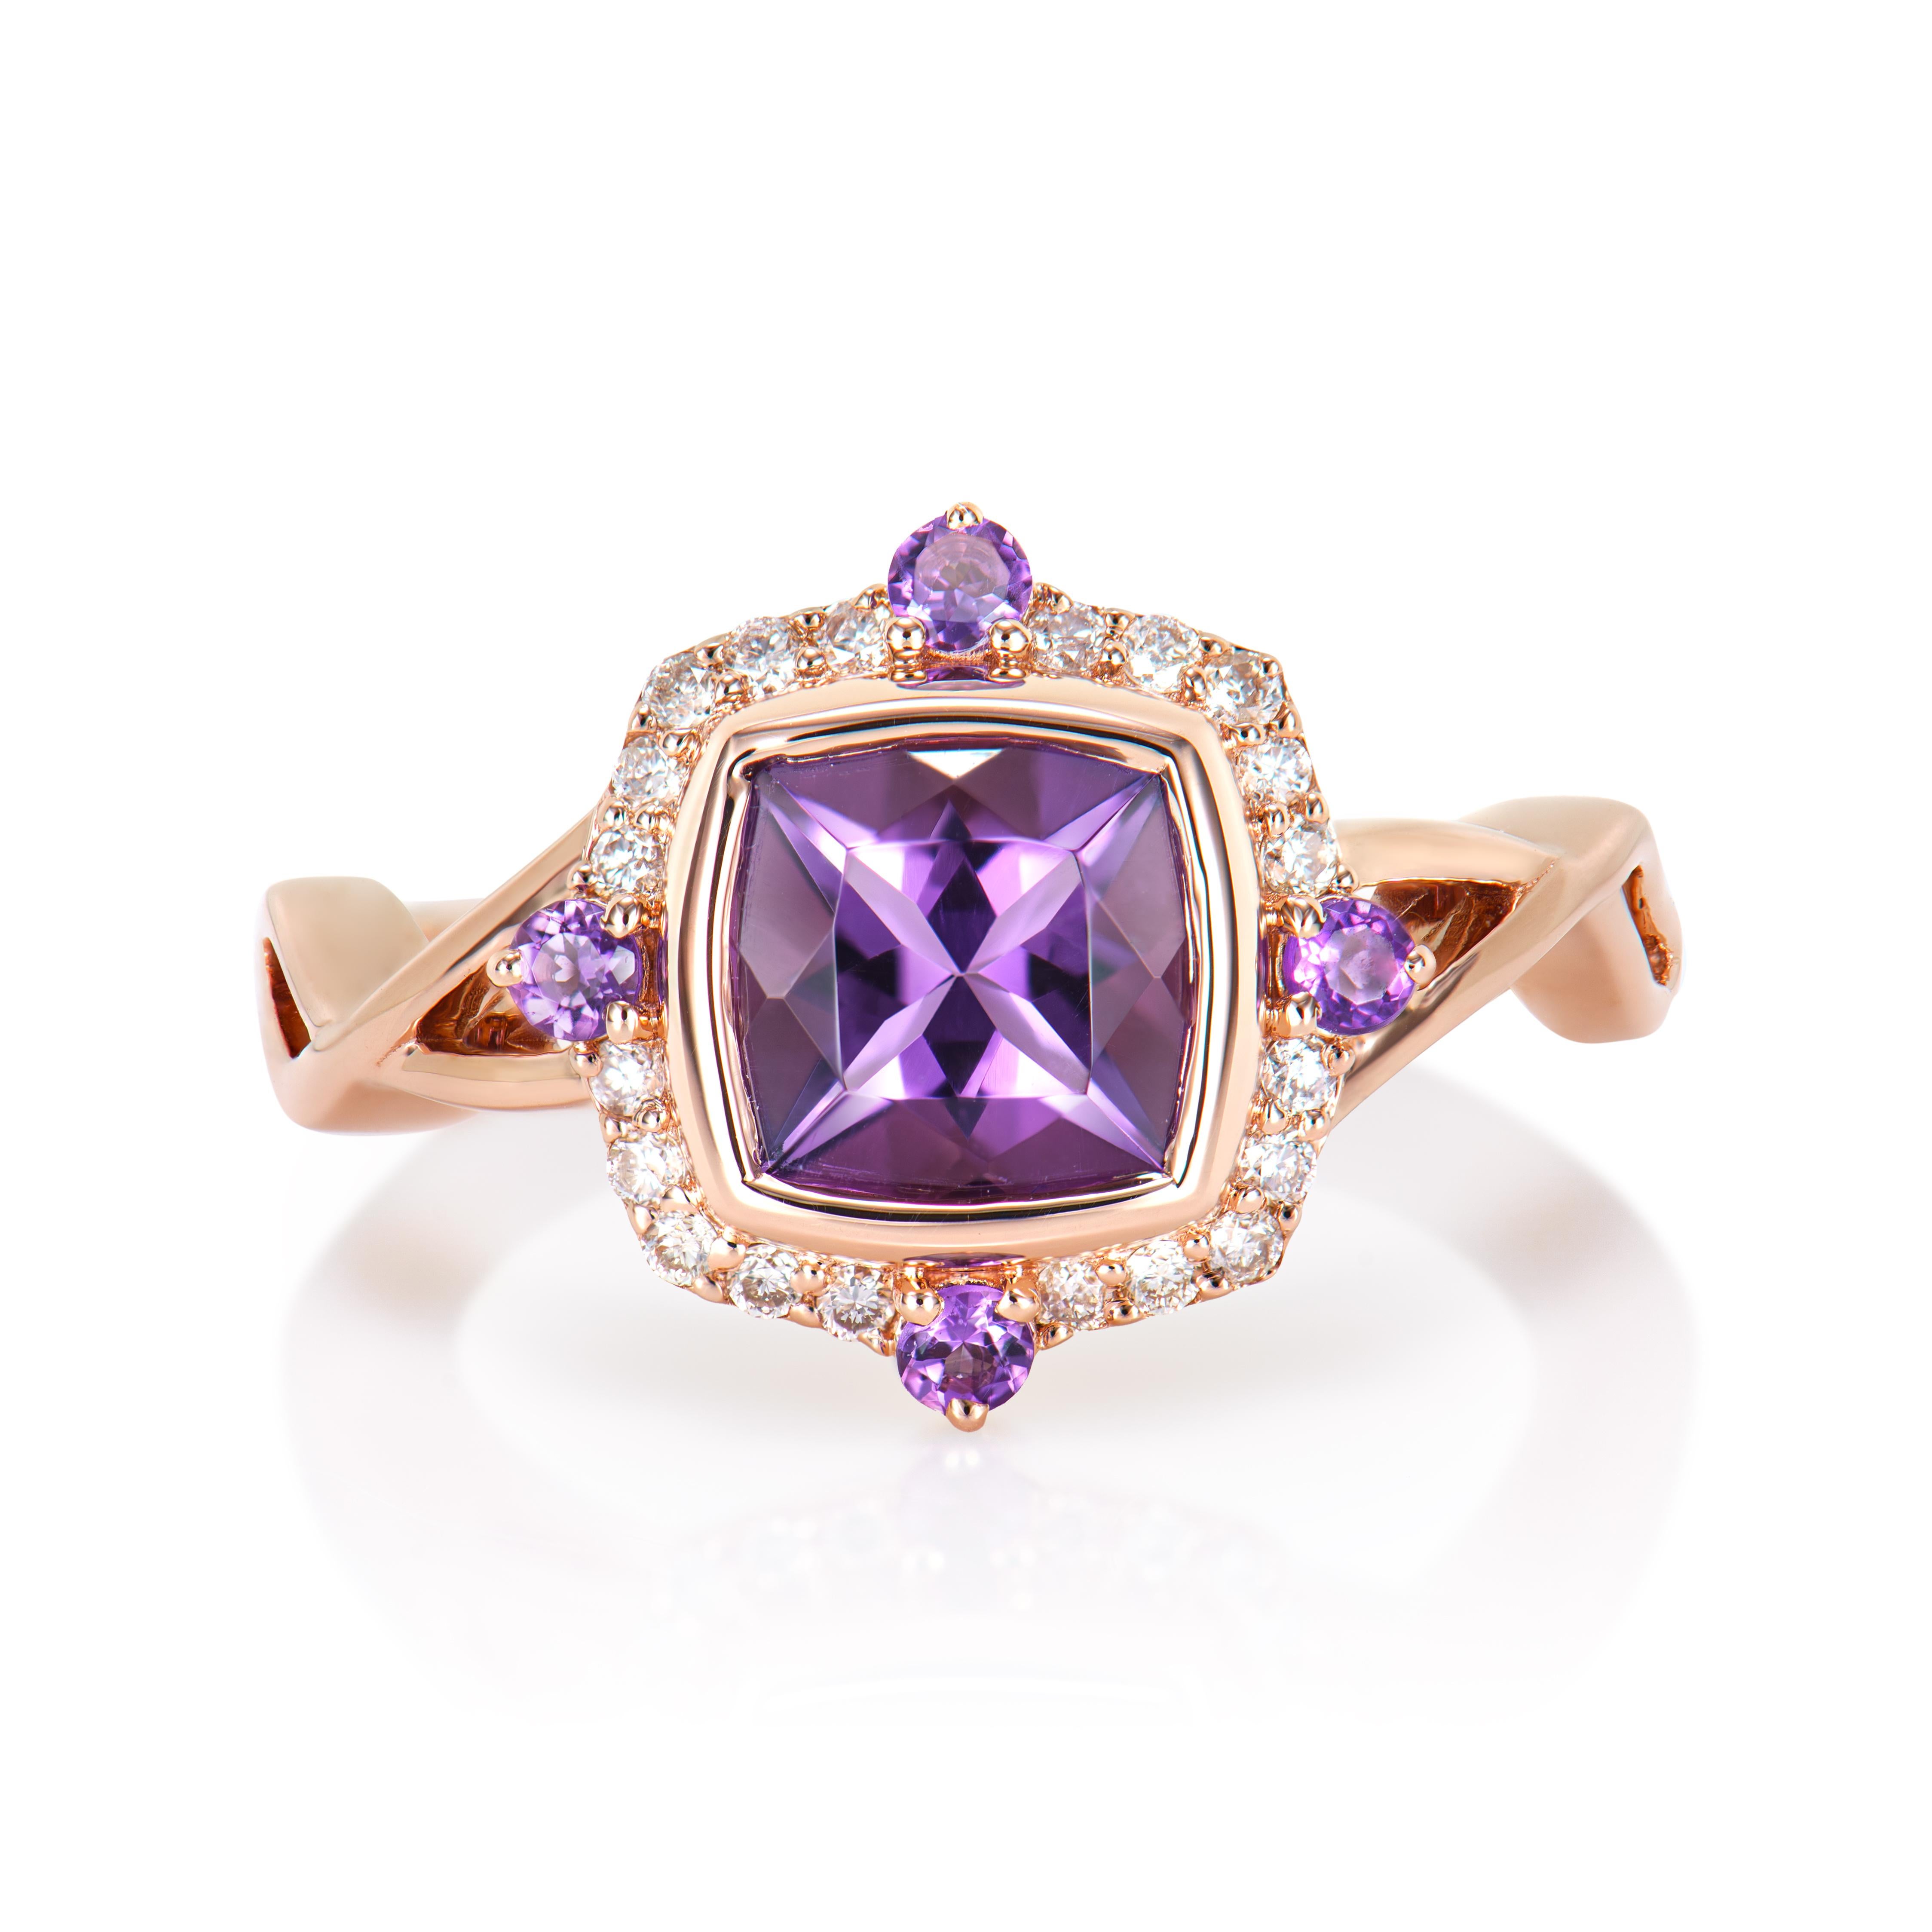 Contemporary 1.22 Carat Amethyst Fancy Ring in 14Karat Rose Gold with White Diamond.   For Sale